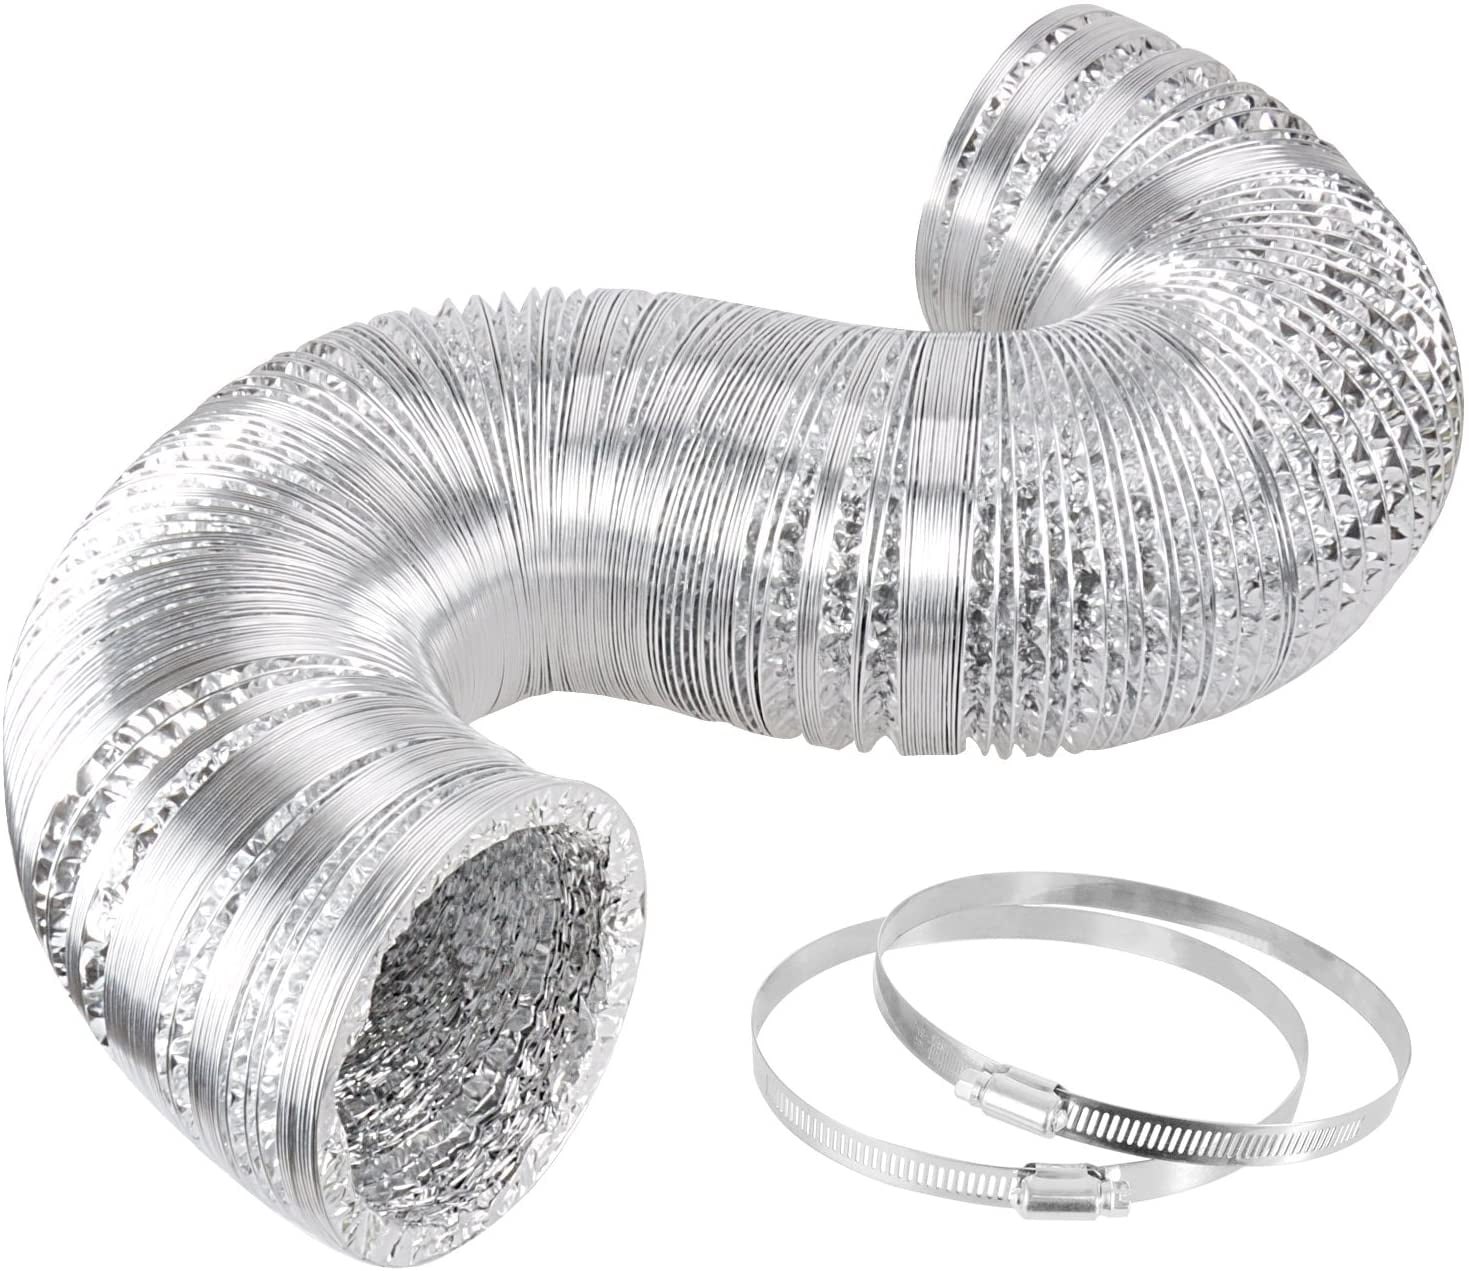 iPower GLDUCT14X25C 14 Inch 25 Feet Non-Insulated Flex Air Aluminum Dryer Vent Hose HVAC Ducting 14 Silver 